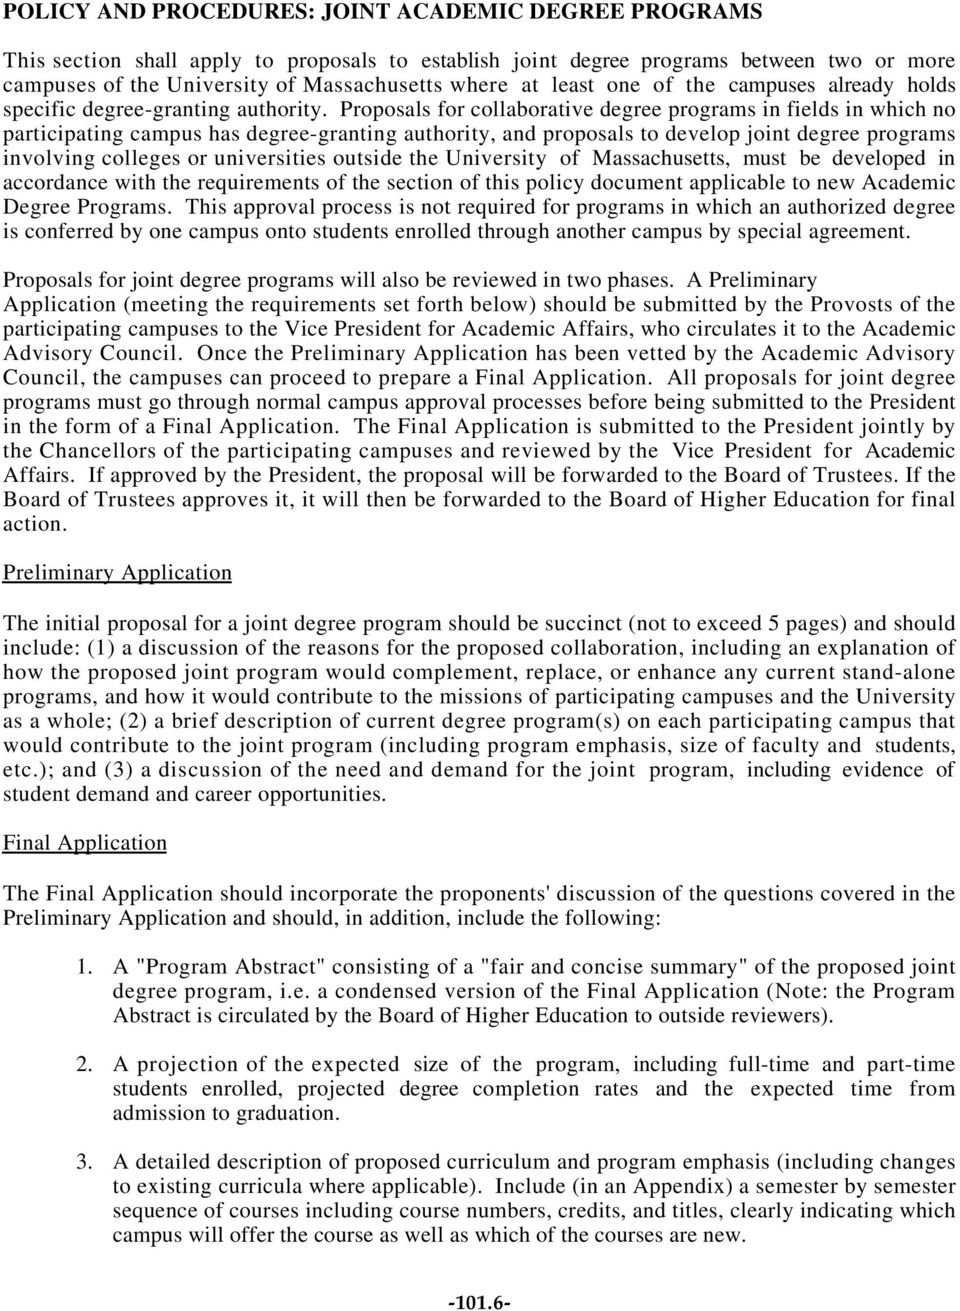 Proposals for collaborative degree programs in fields in which no participating campus has degree-granting authority, and proposals to develop joint degree programs involving colleges or universities